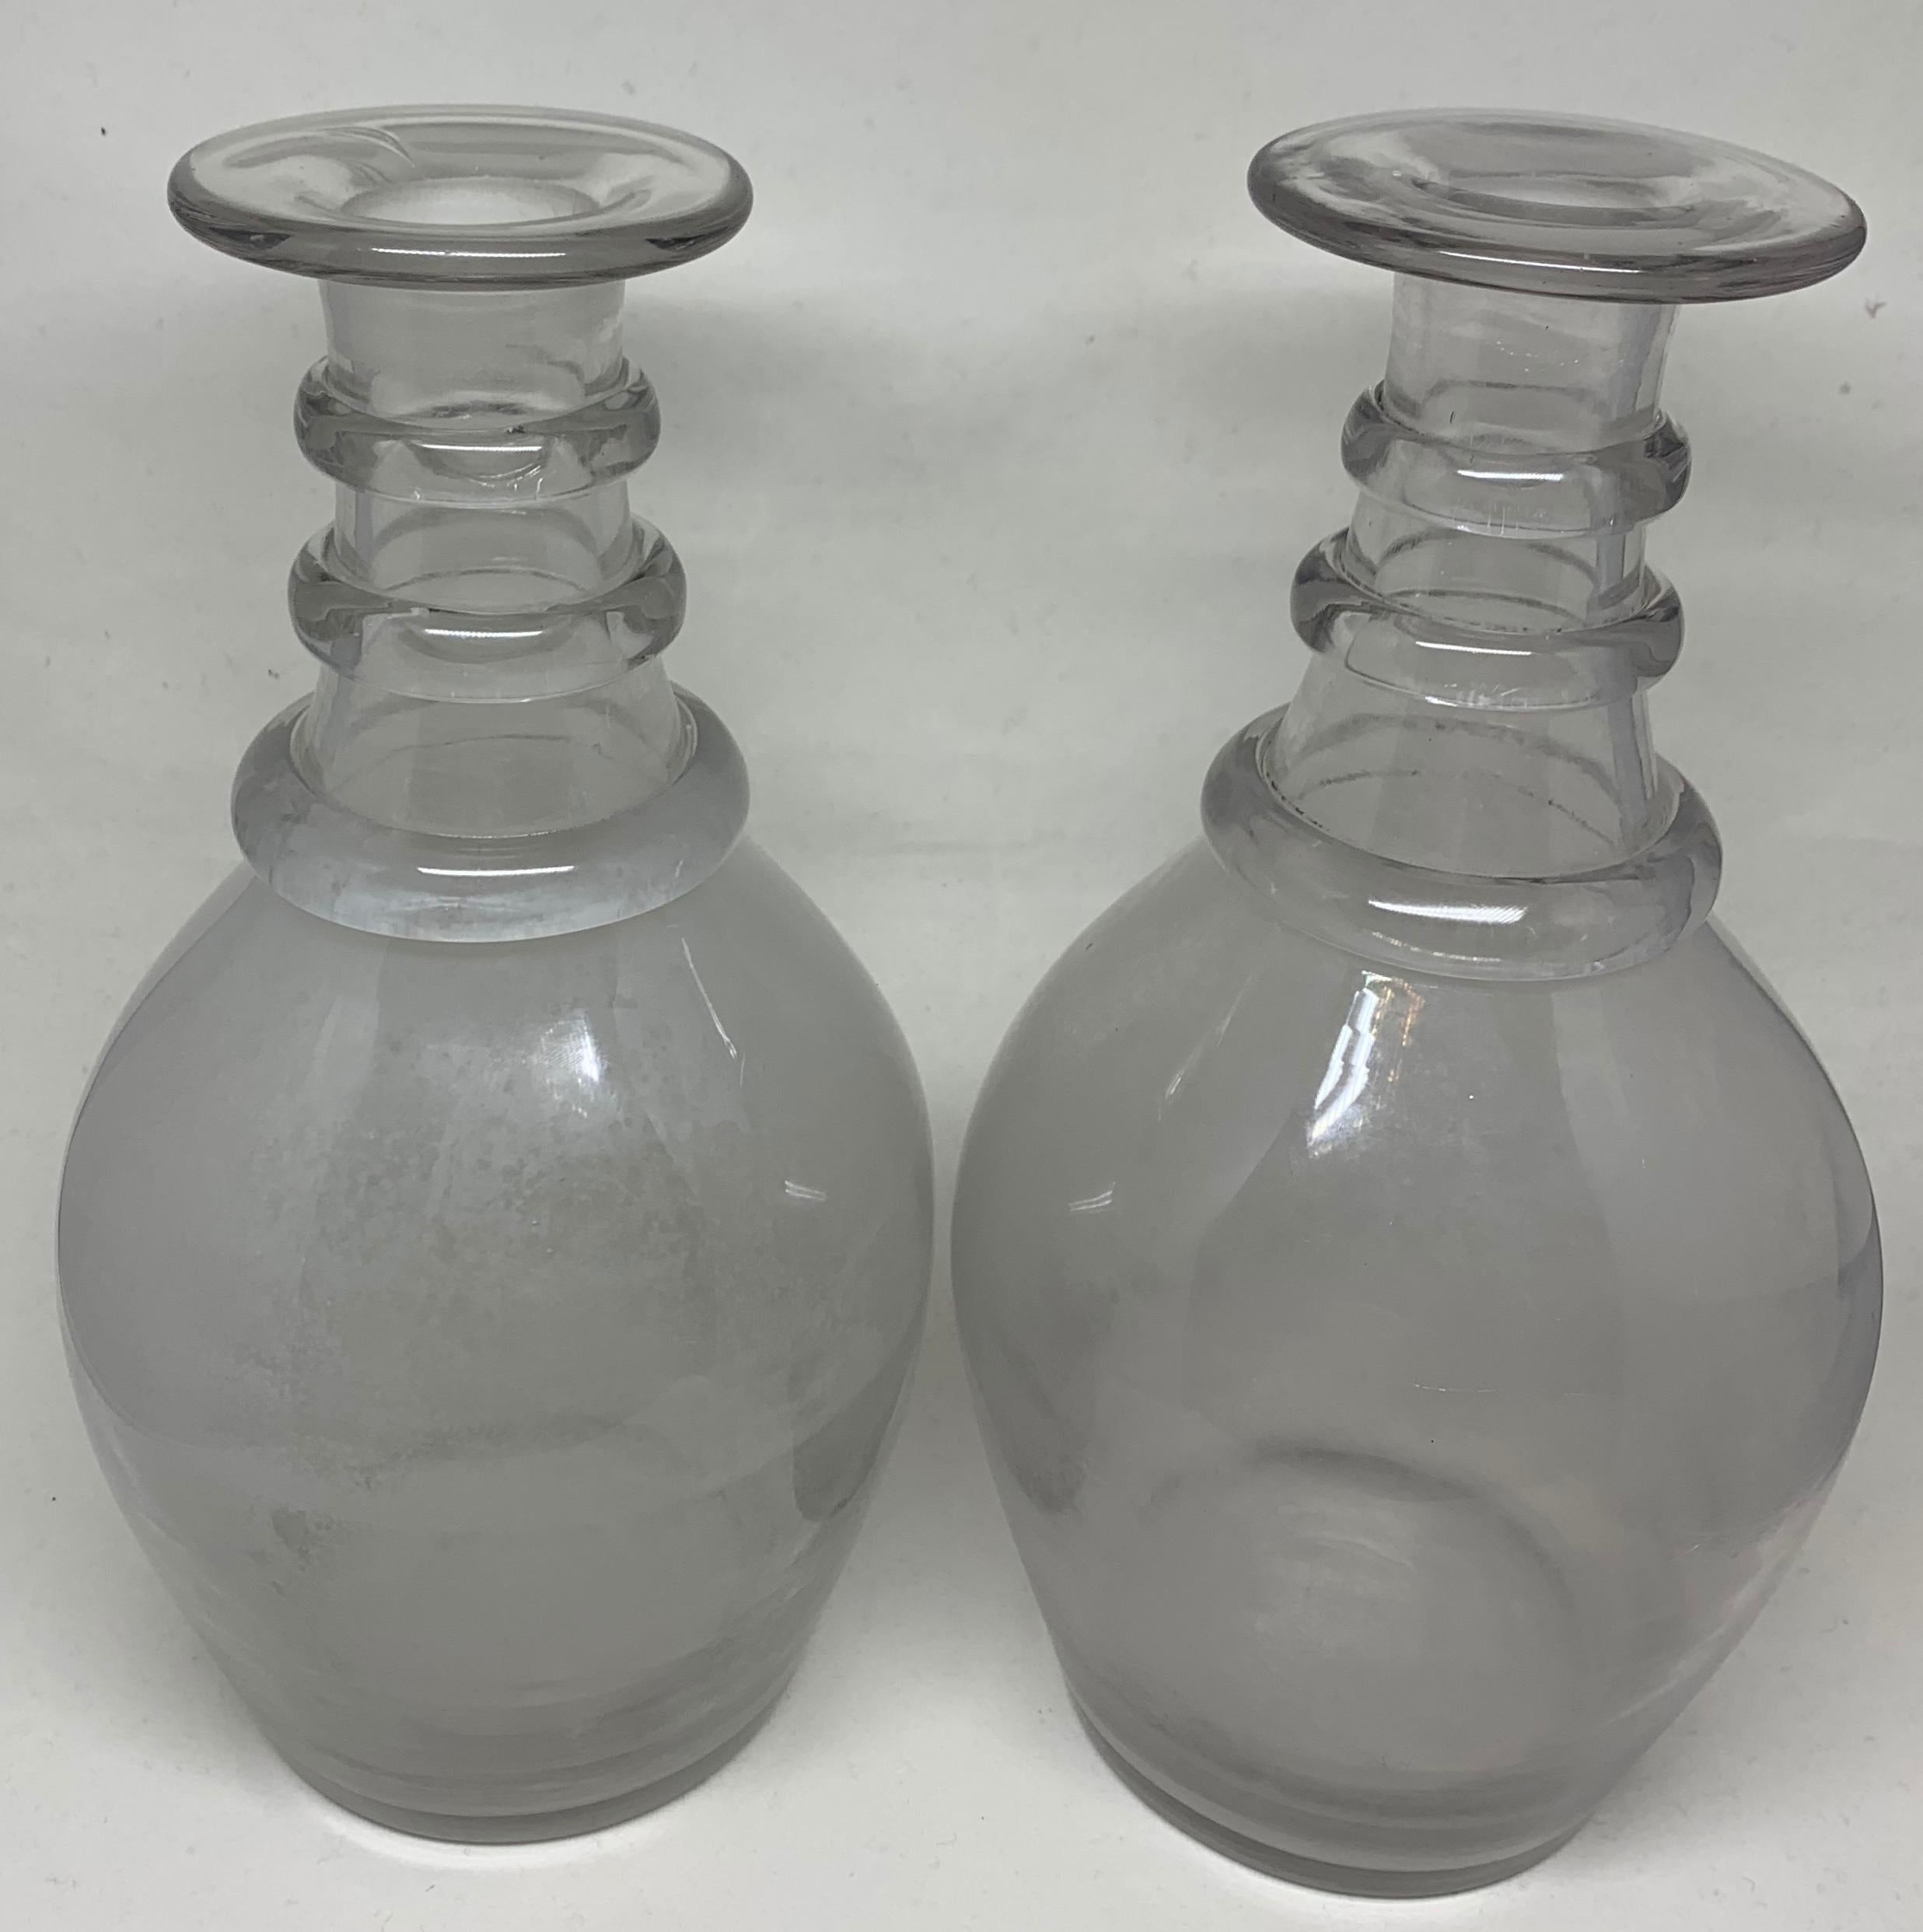 Pair Italian hand blown ring neck bottles. Vintage pair Murano clear glass bottles with three bands at the neck, interior clouding from use. Italy, 1930s
Dimensions: 9.25